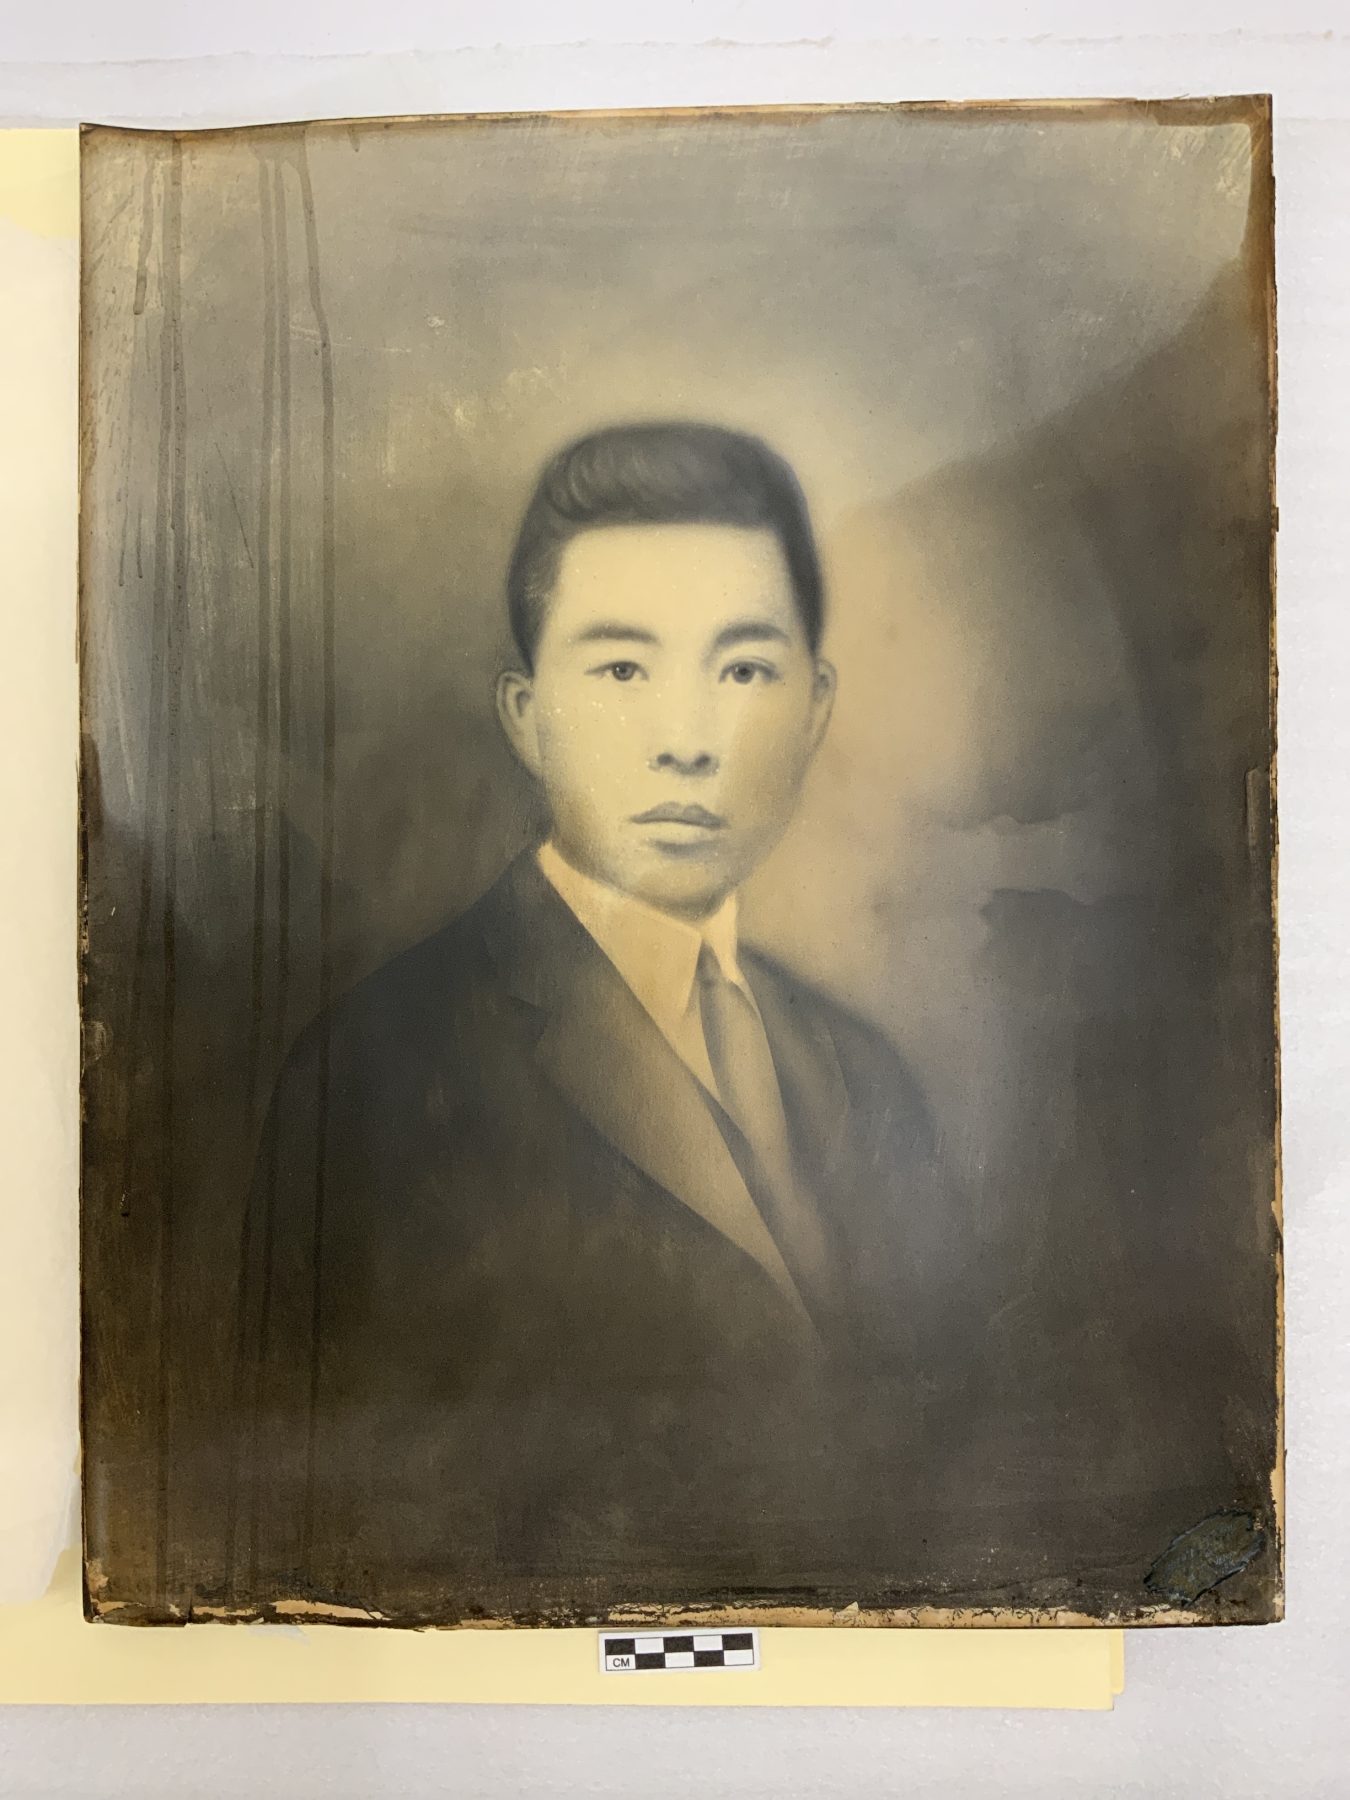 2006.203.824 Crayon portrait, likely of a Chin family member, ca. 1860s-1910s. Courtesy of Marcela Dear, Museum of Chinese in America (MOCA) Collection.